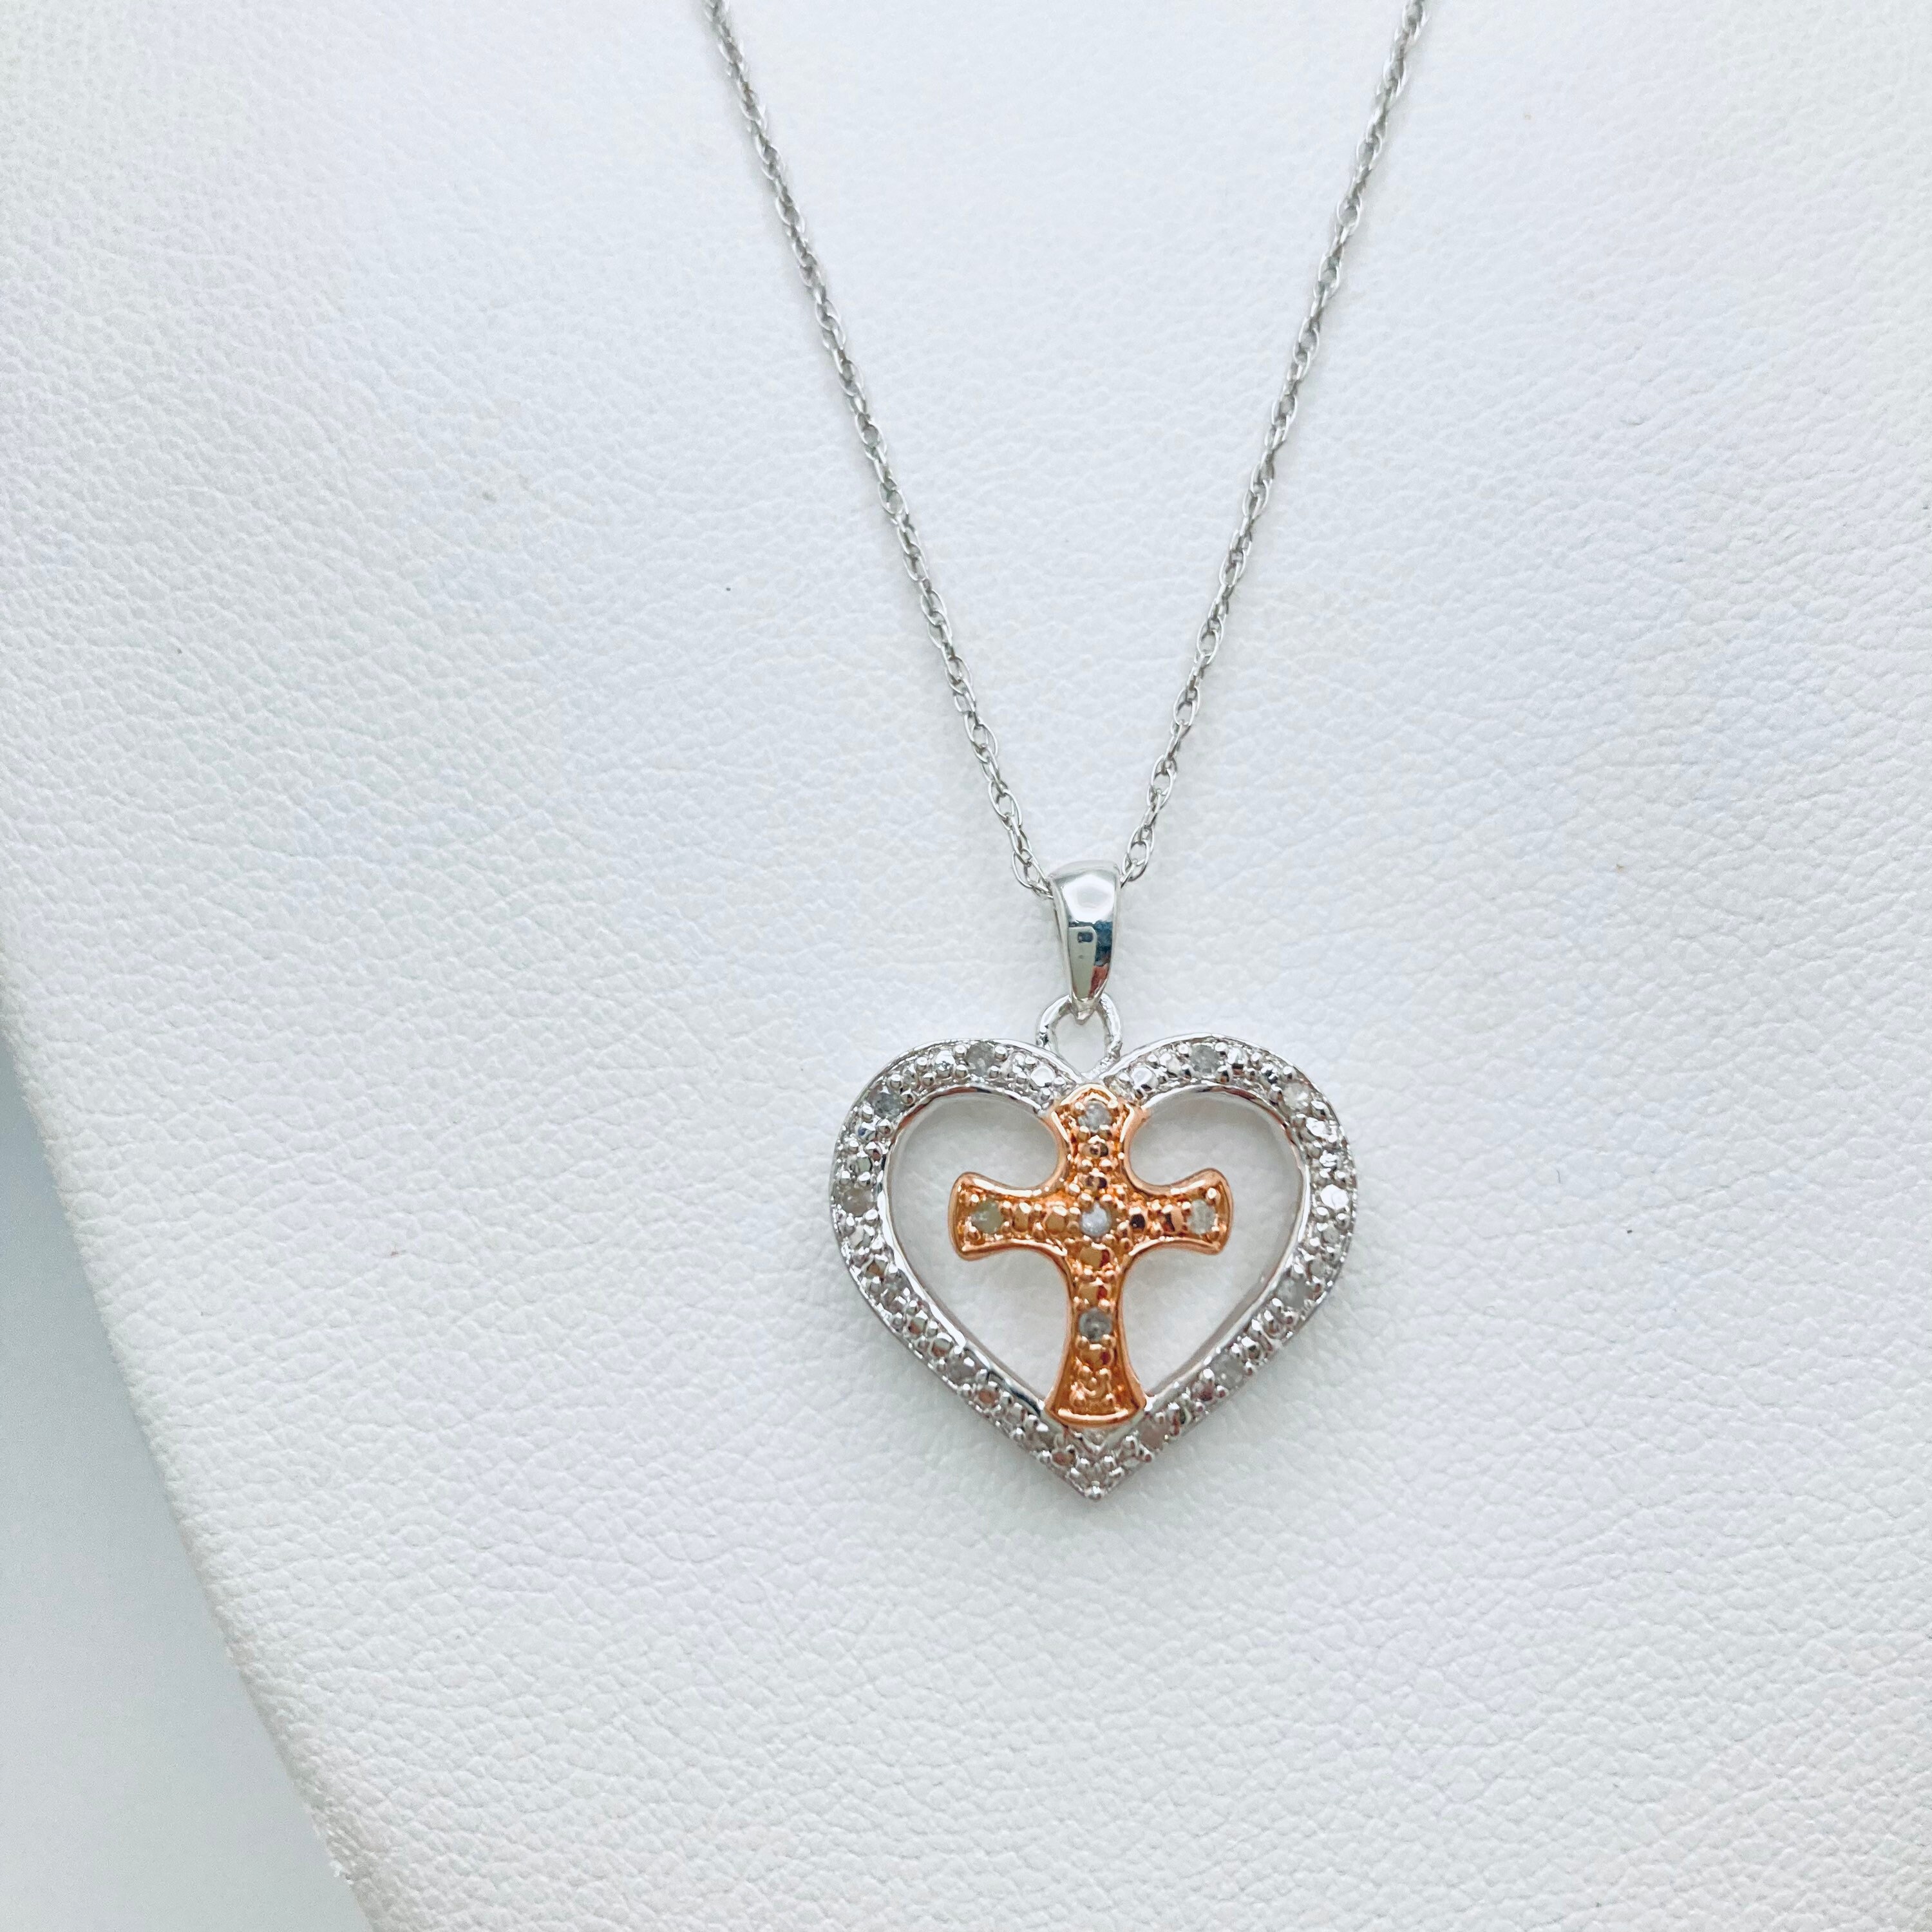 925 Sterling Silver Heart and Cross Pendant Diamond Accent | Etsy